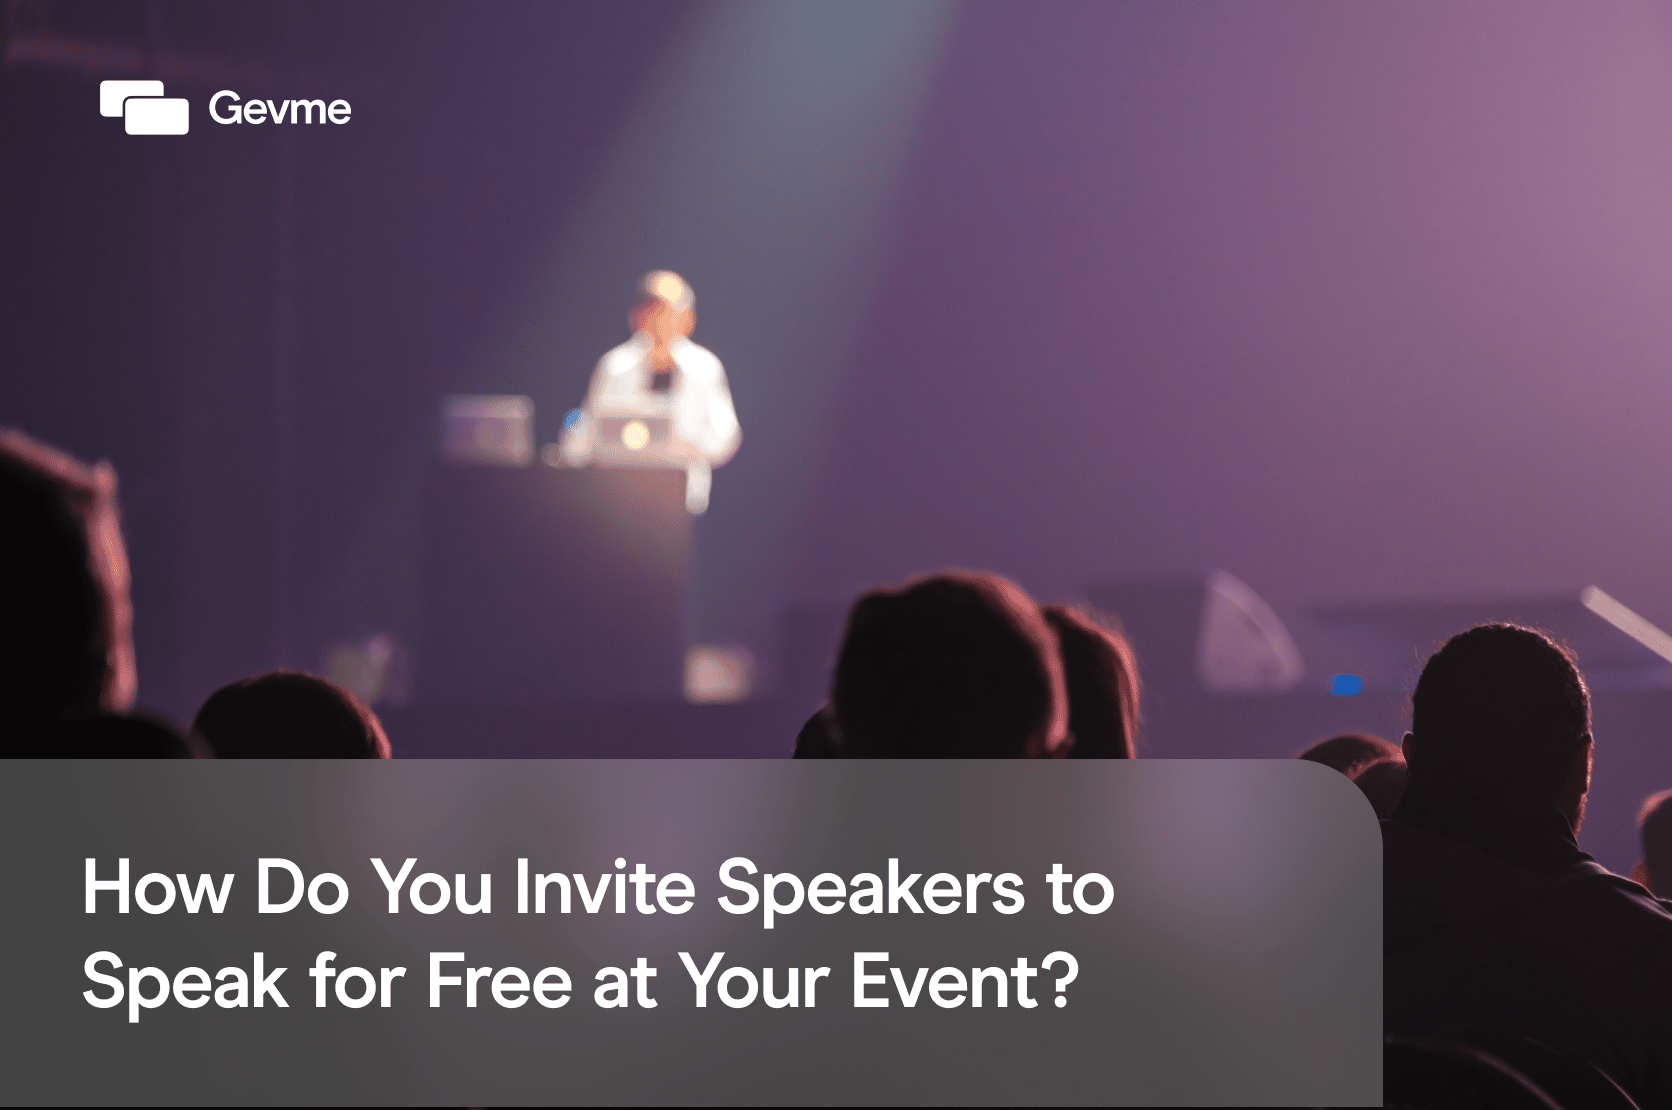 How to invite speakers to speak for free at your event